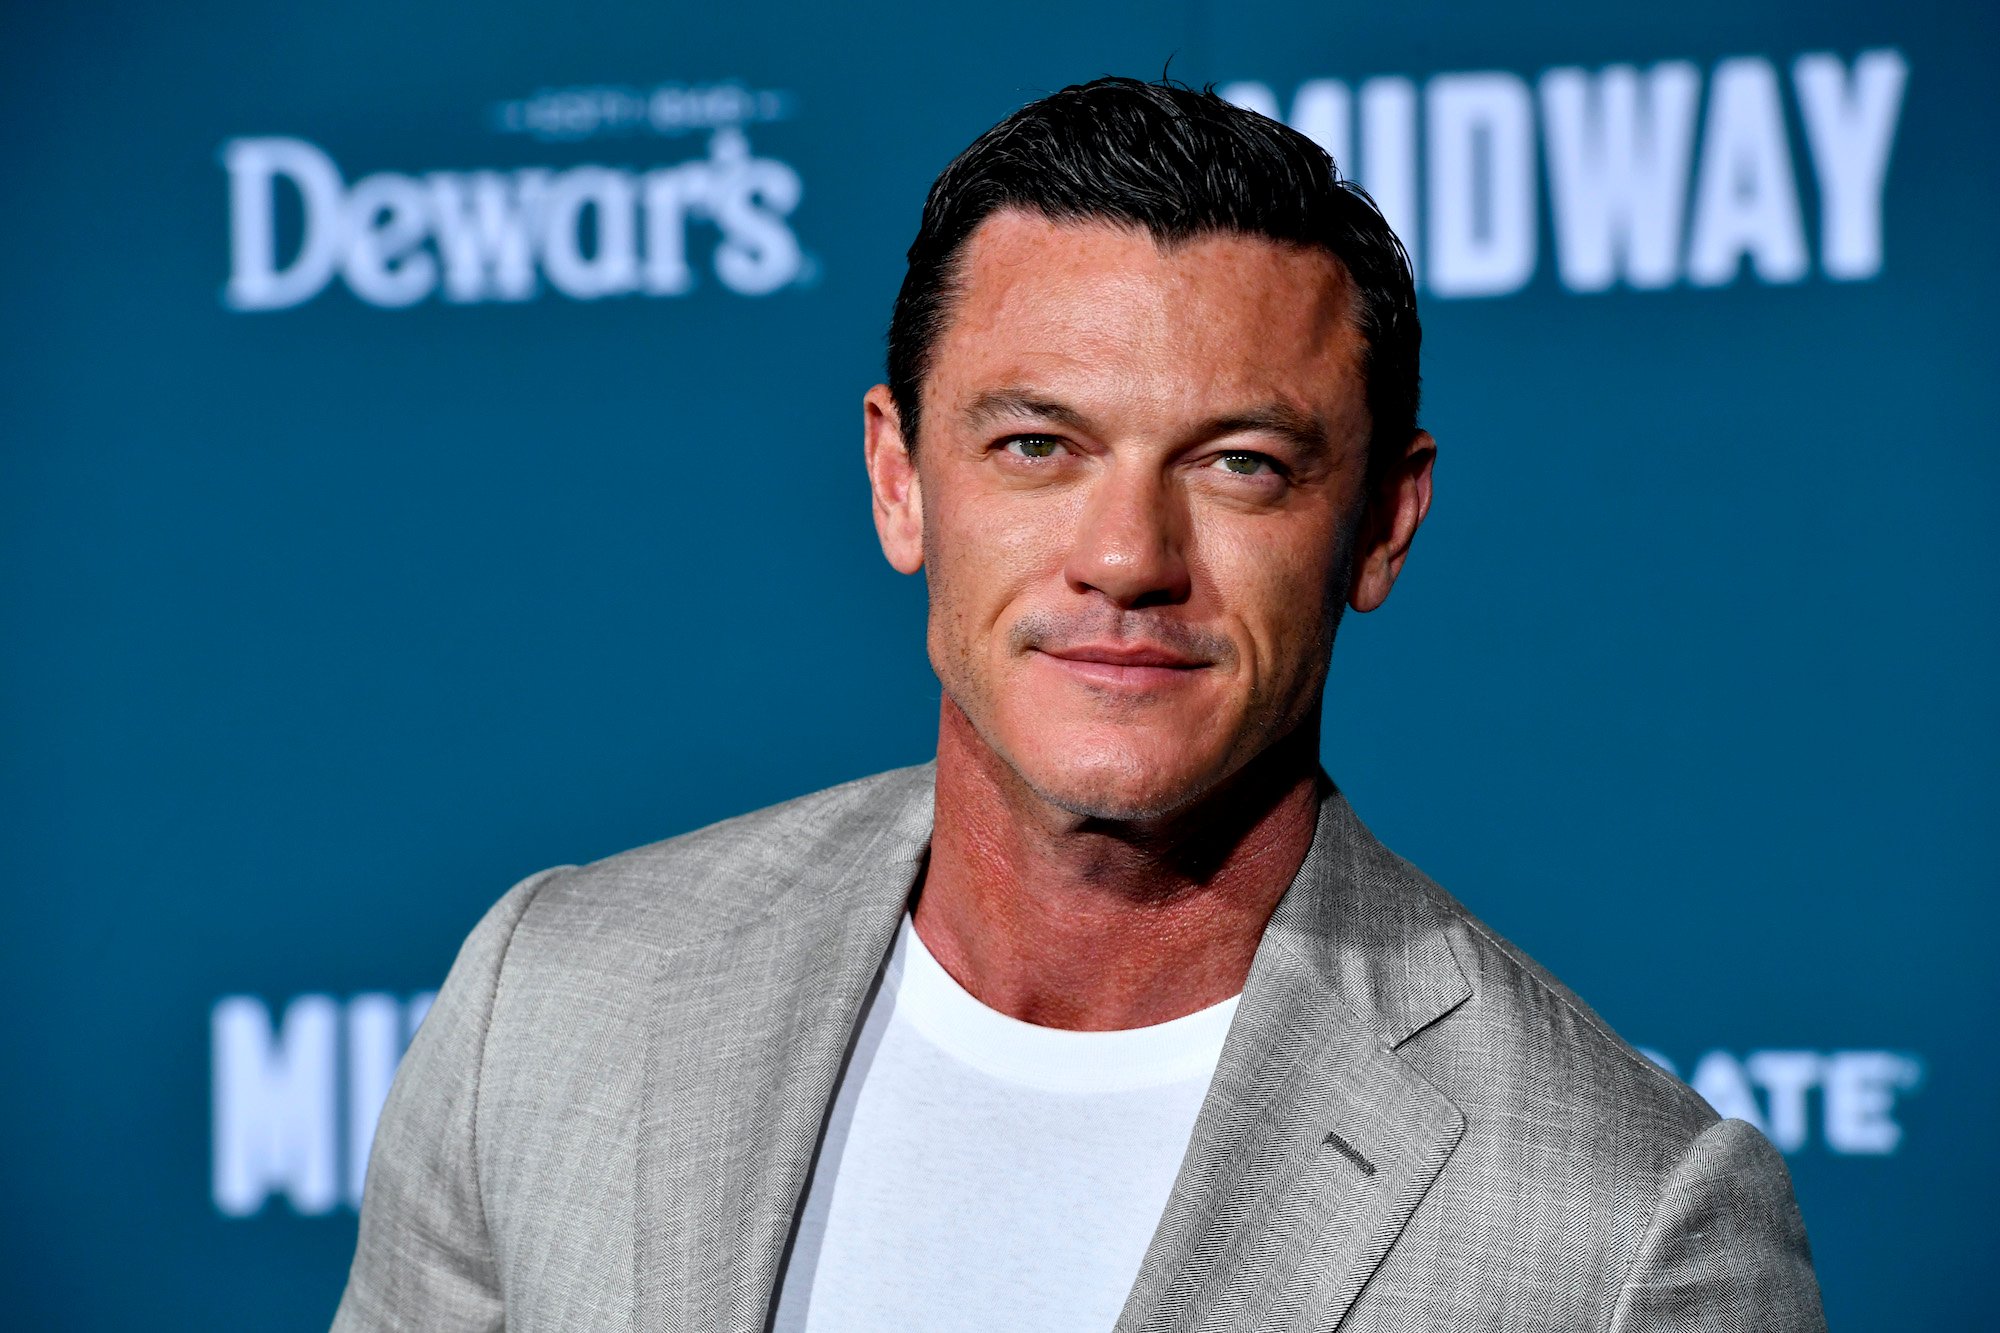 Luke Evans smiling in front of a blue background